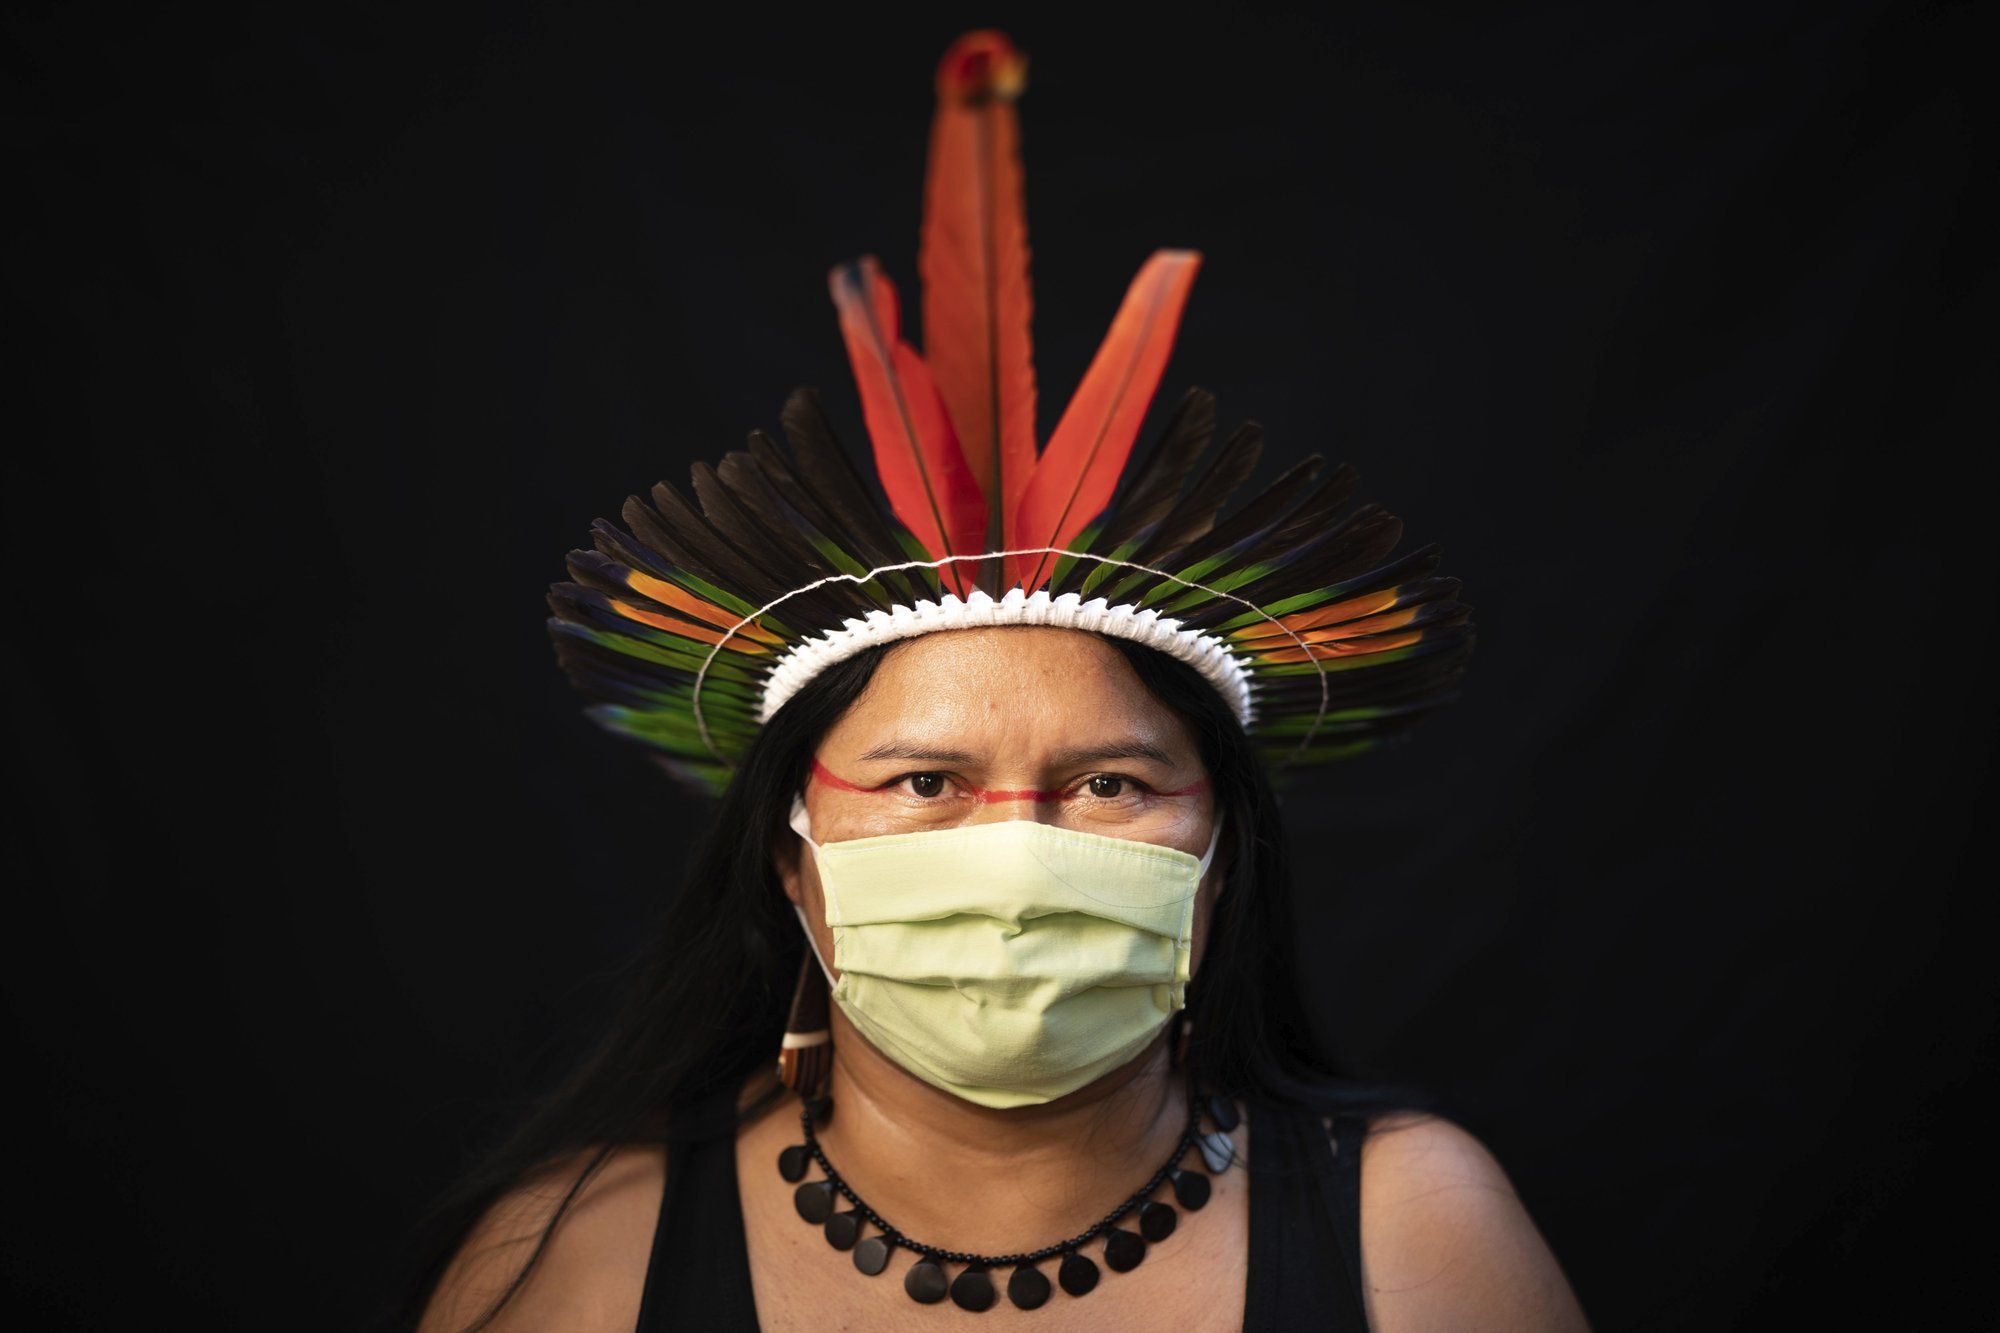 Dilza, 39, of the Sateré Mawé indigenous ethnic group, poses for a portrait wearing the traditional dress of her tribe and a face mask amid the spread of the new coronavirus in Manaus, Brazil, Wednesday, May 27, 2020. Image by Felipe Dana / AP Photo. Brazil, 2020.